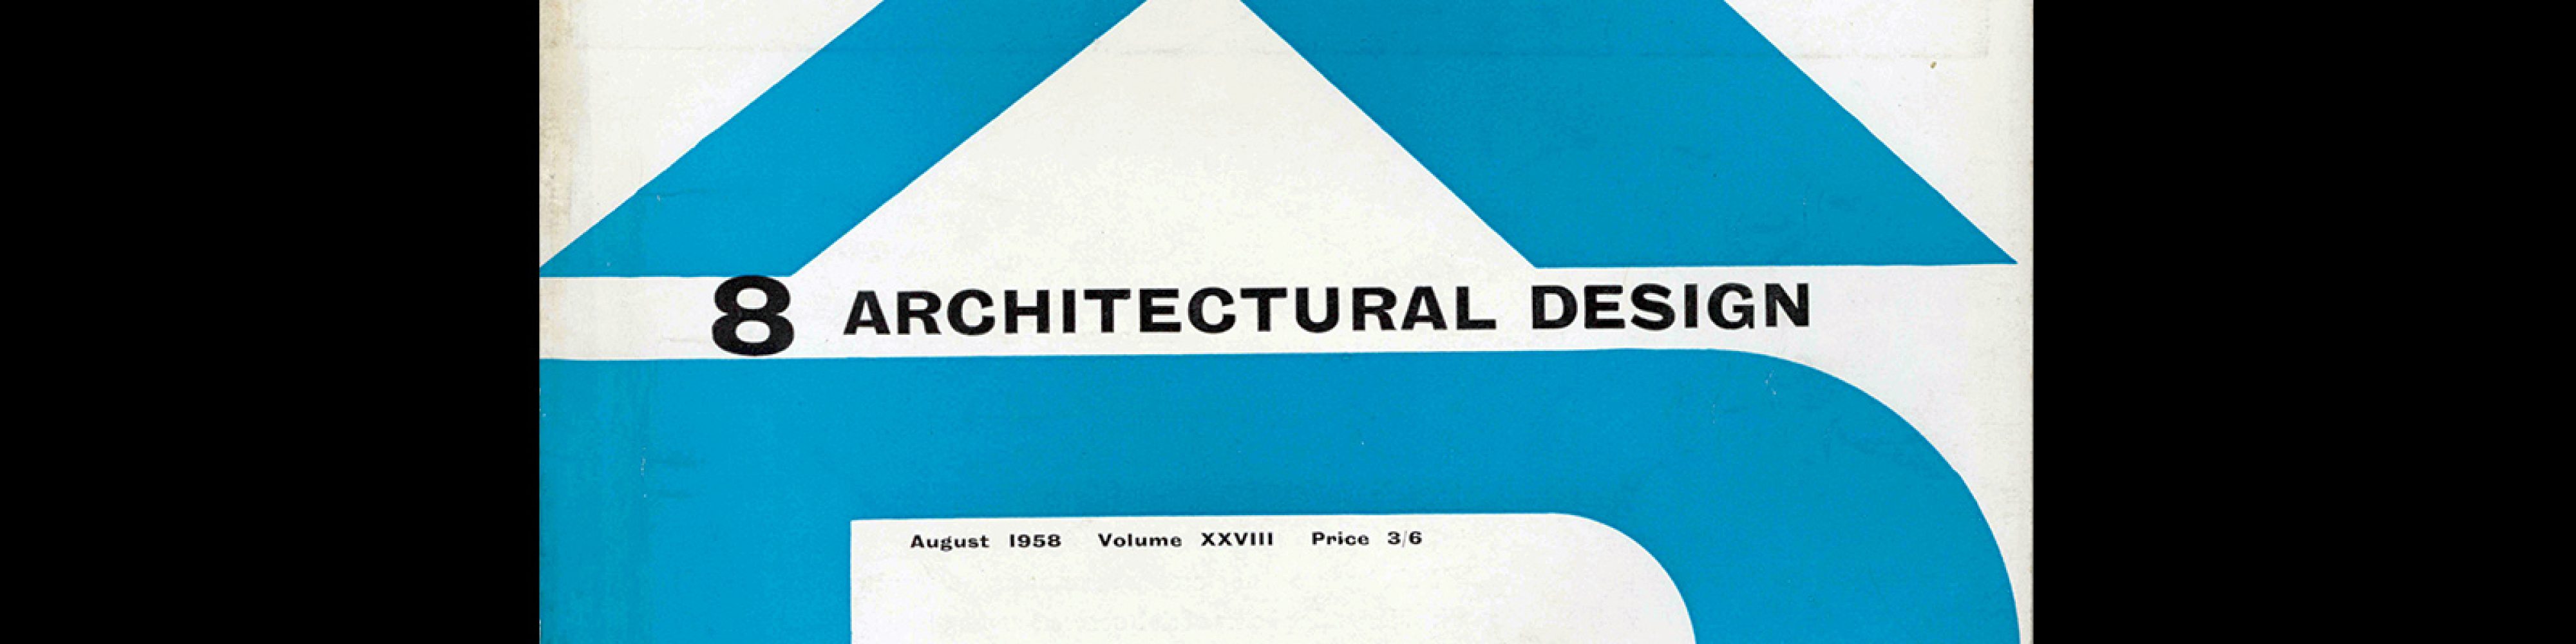 Architectural Design, August 1958. Cover design by Theo Crosby